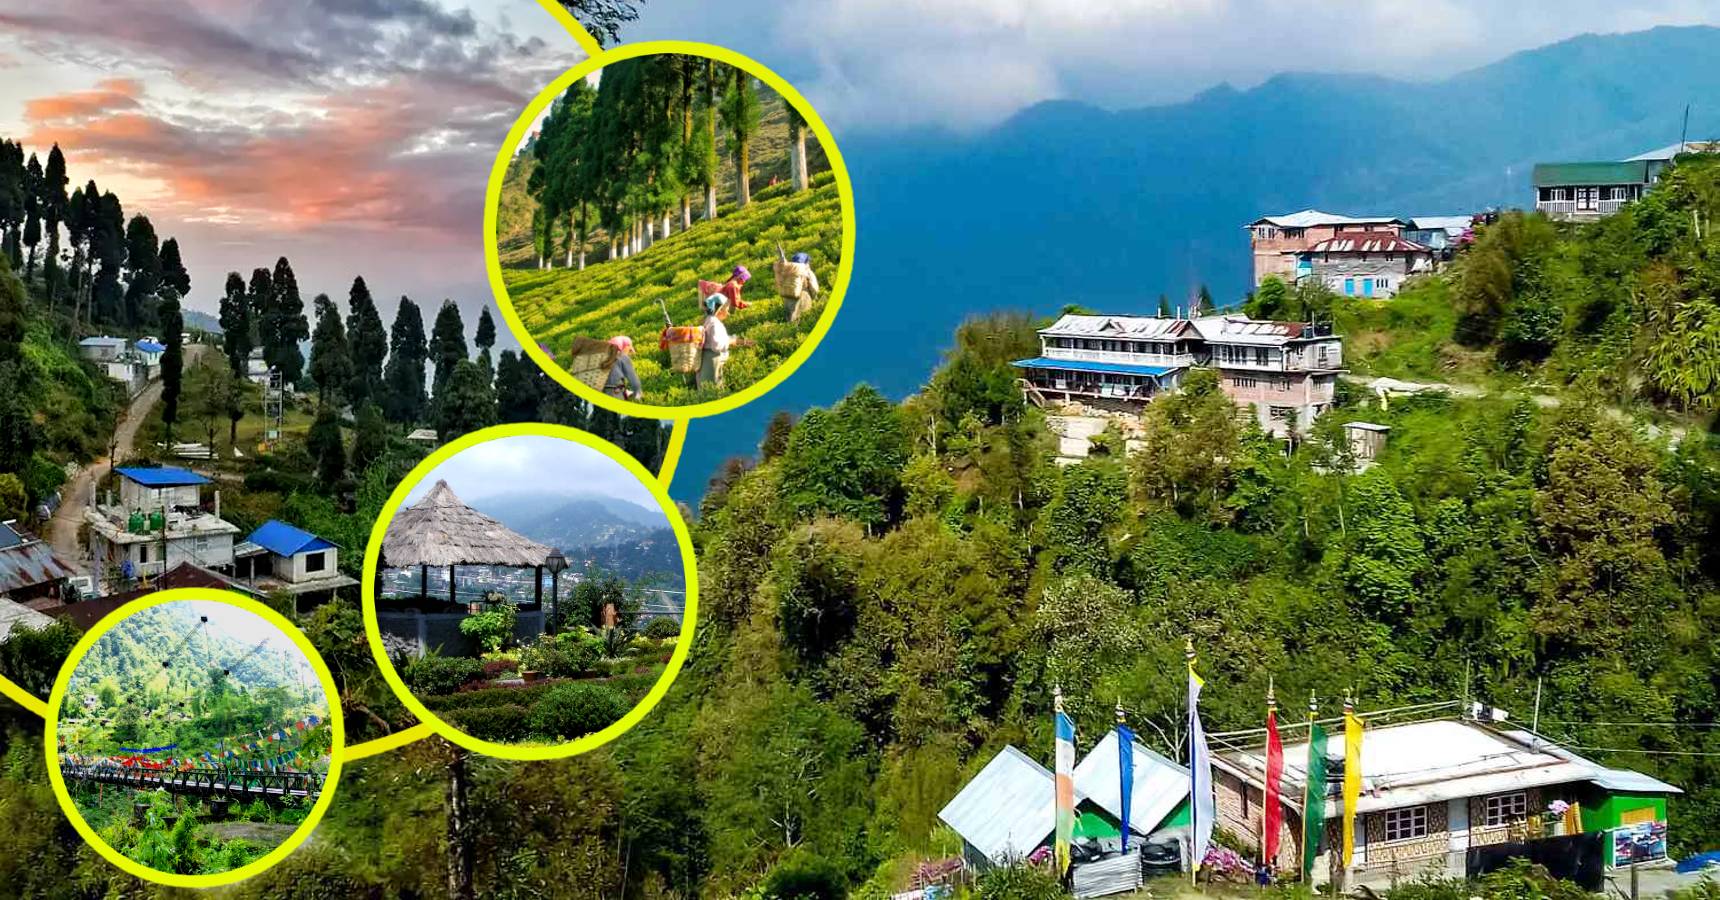 A new offbeat travel destination called Sinji in Kalimpong